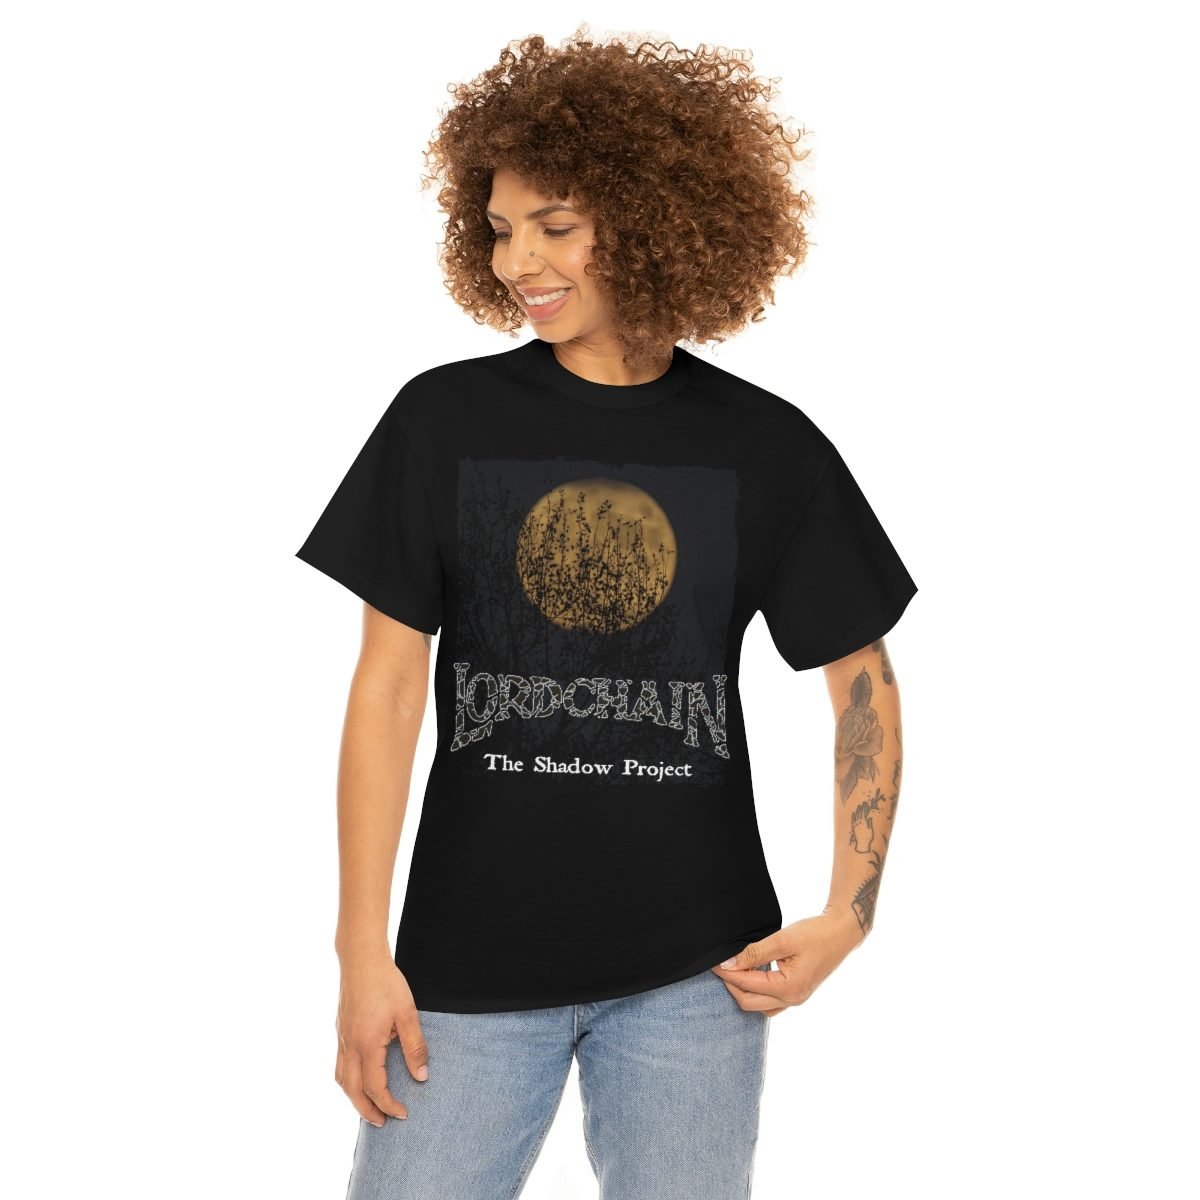 Lordchain – The Shadow Project Short Sleeve Tshirt 5000